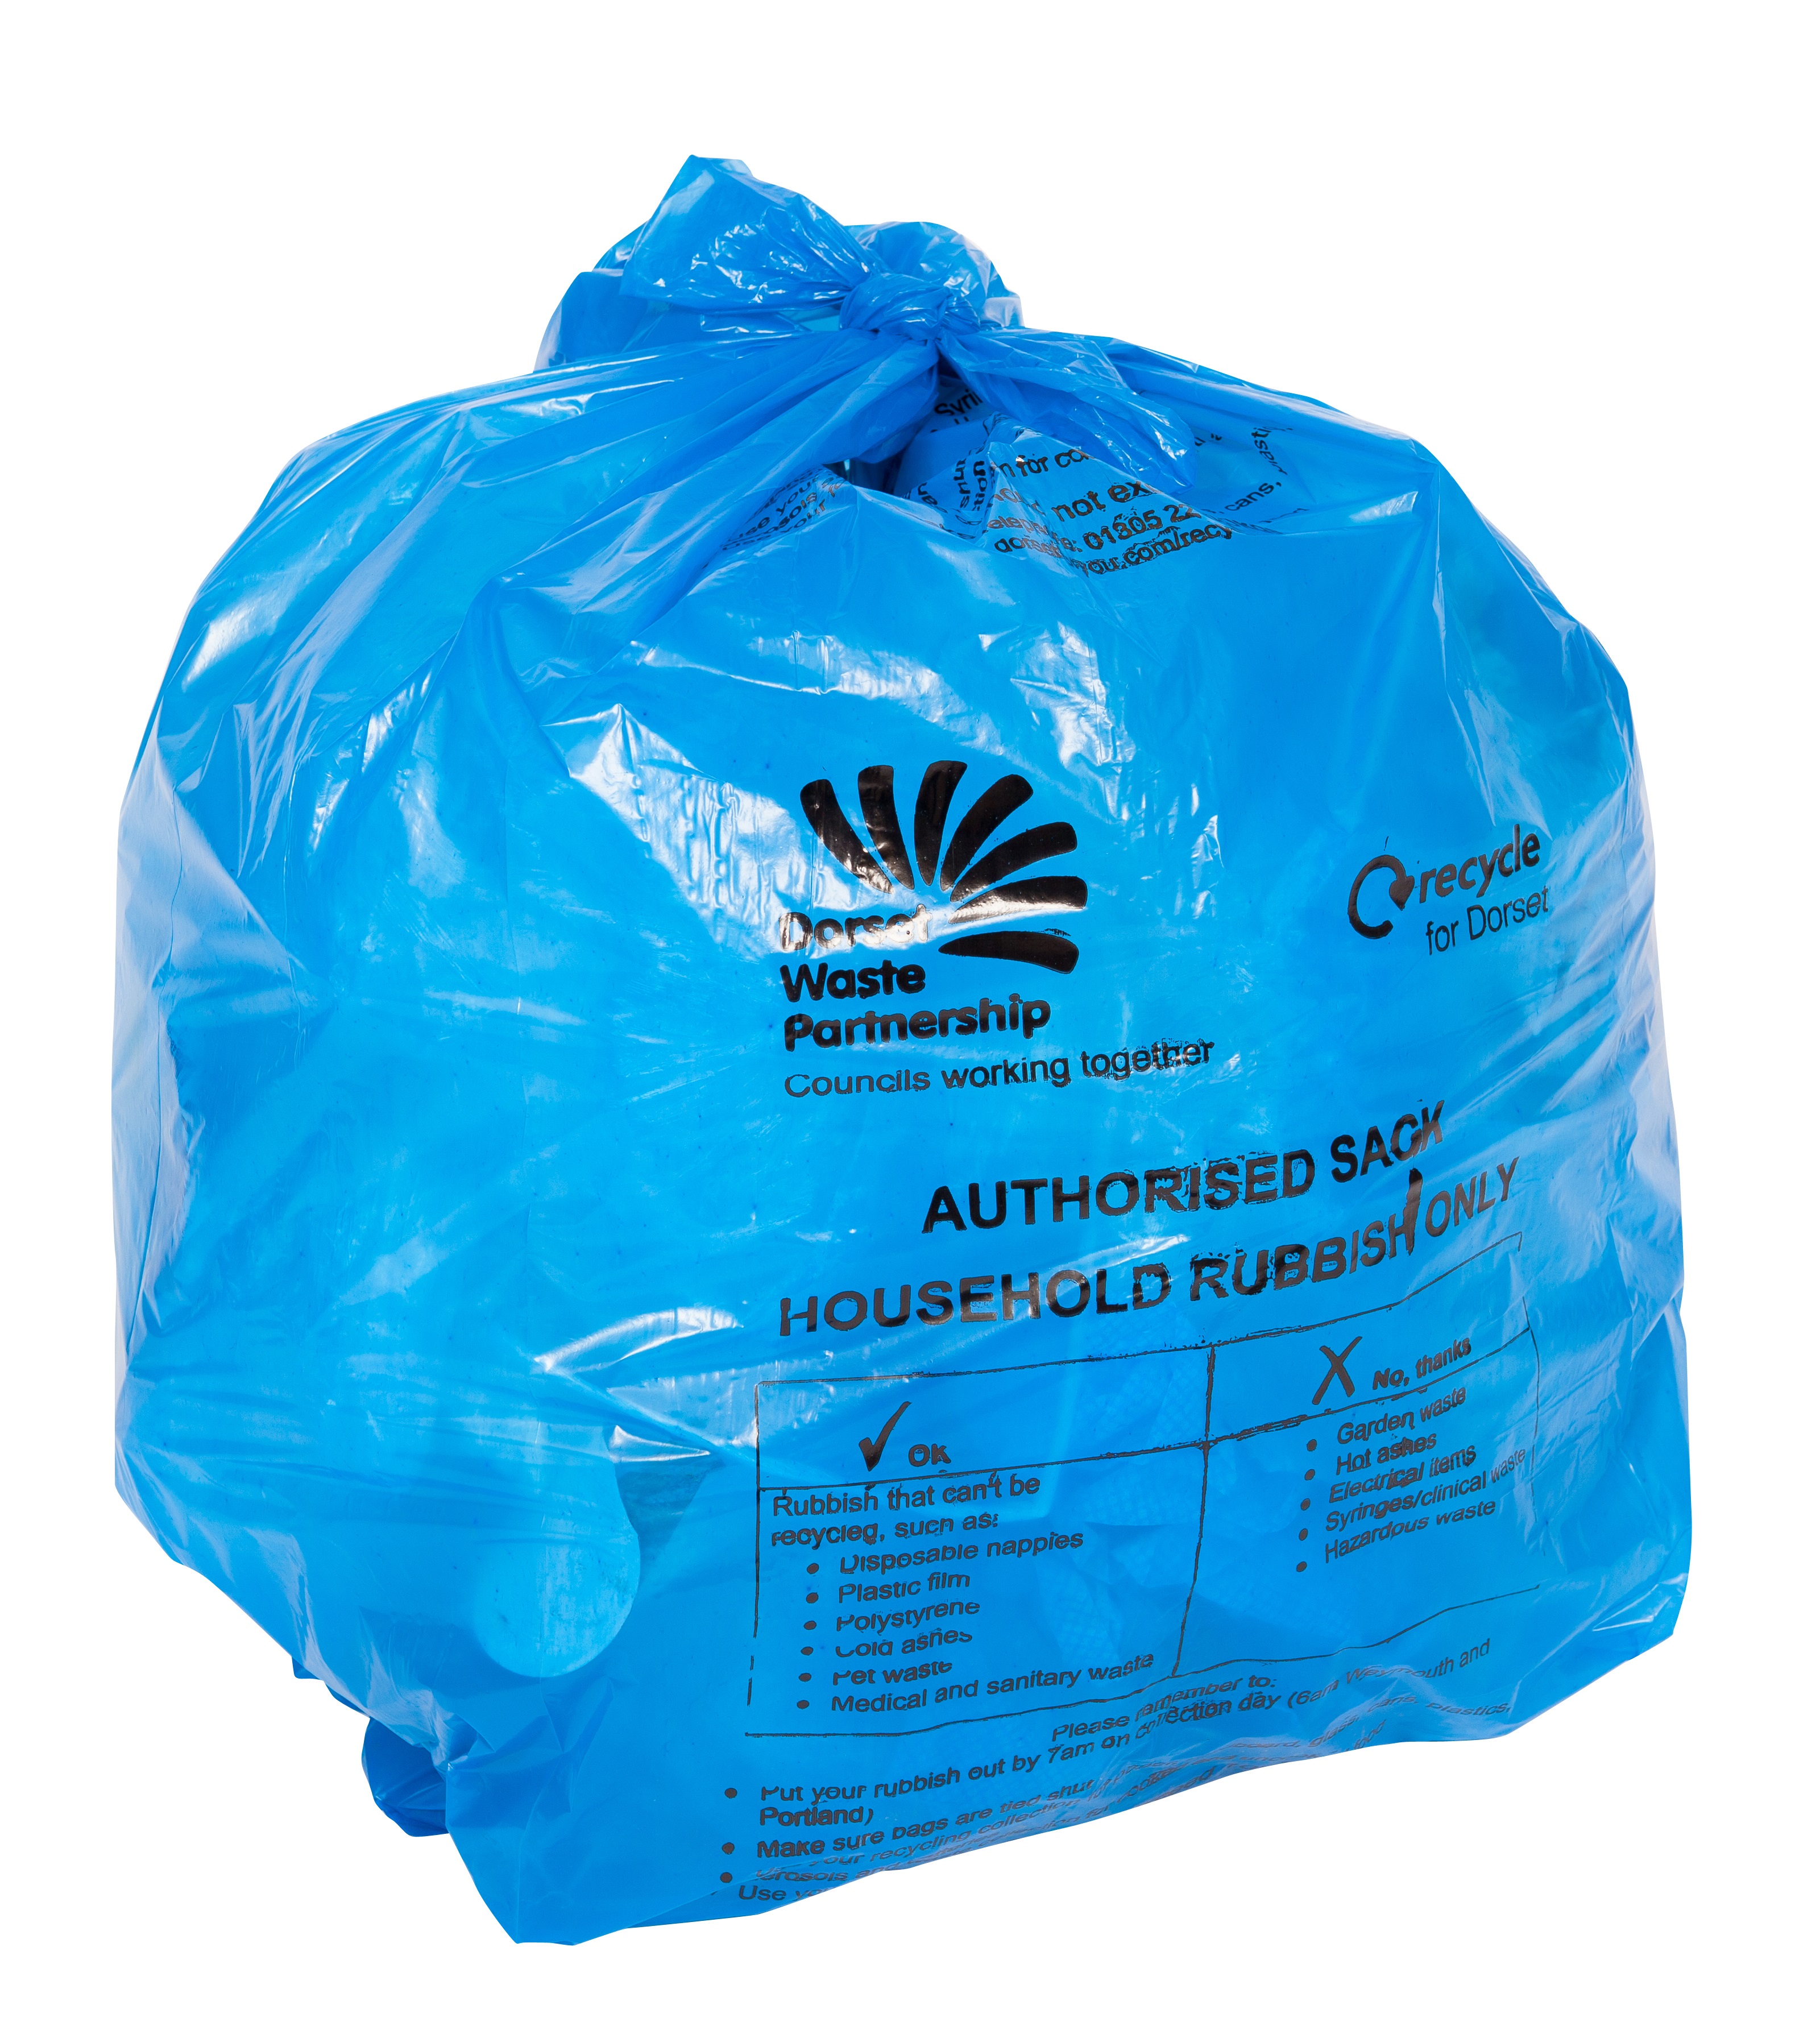 Recycle for Dorset bin - Blue bag for rubbish